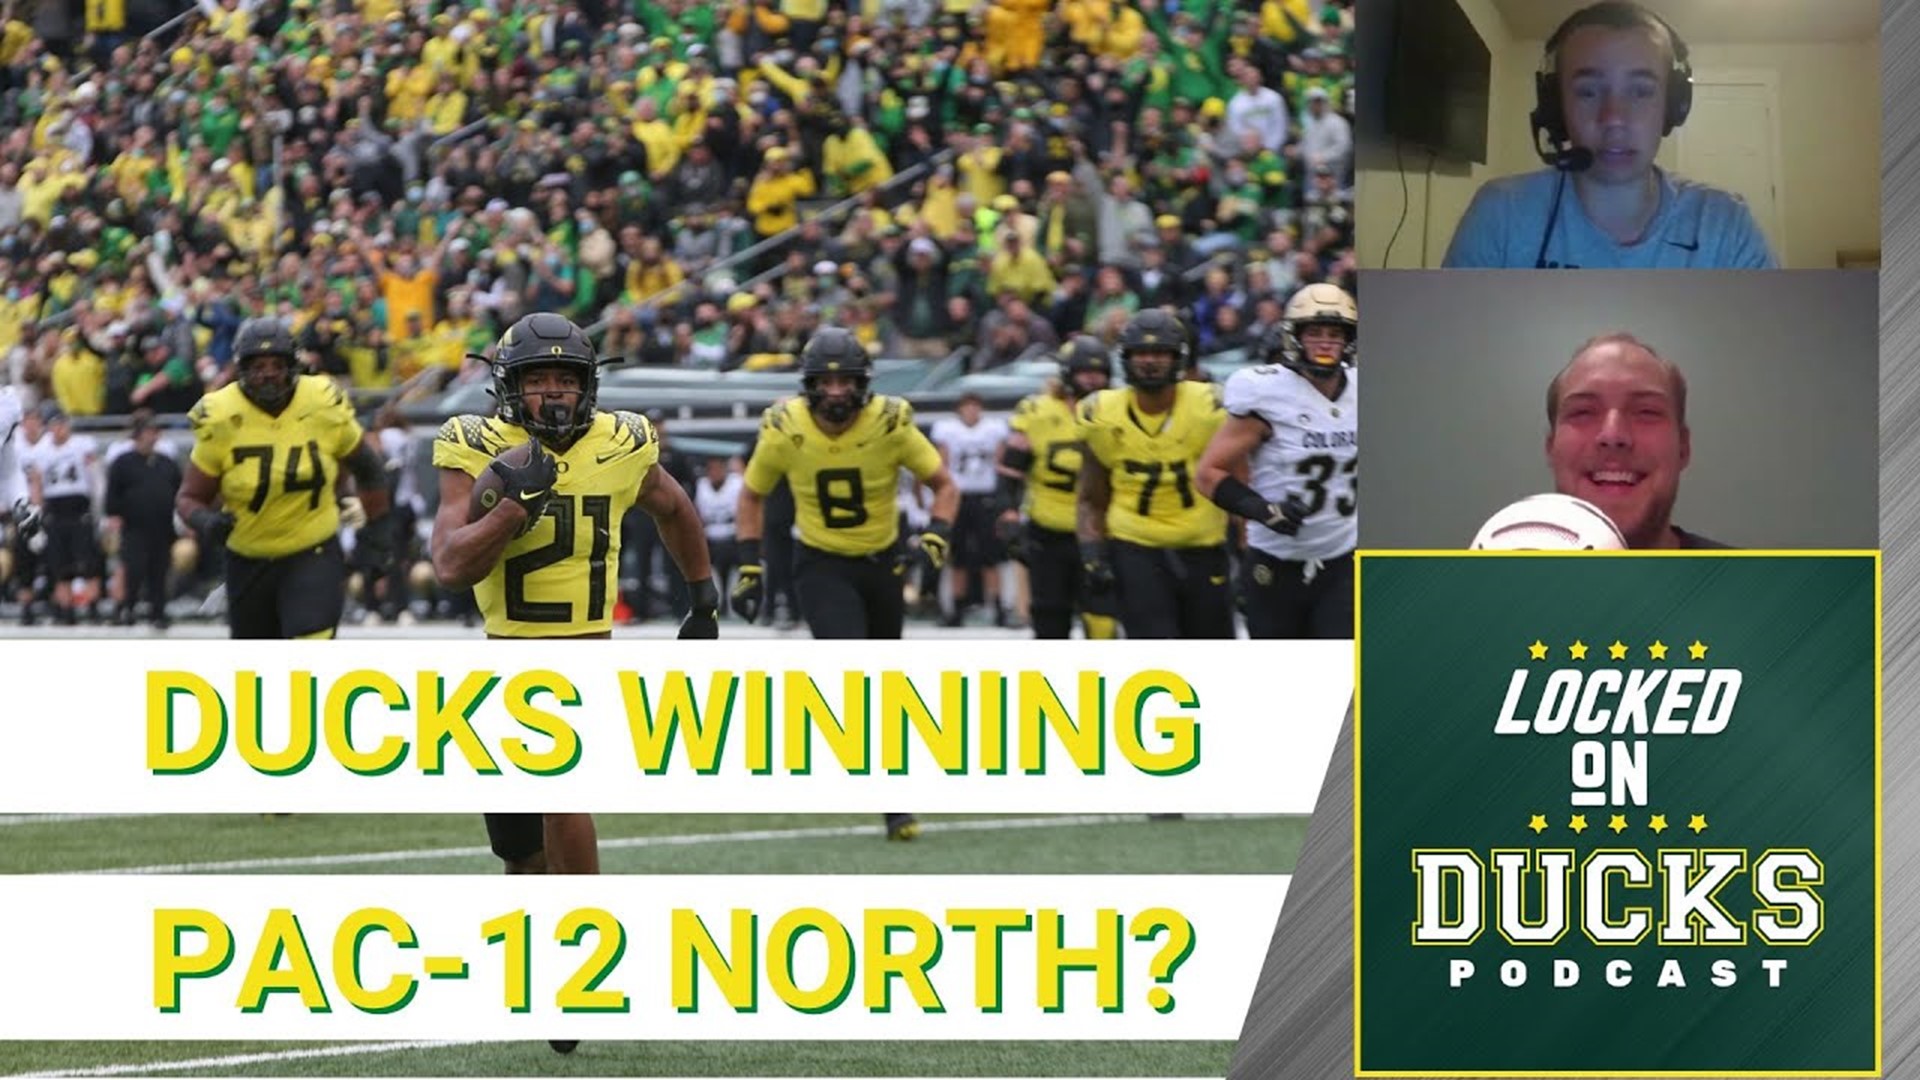 On today's episode of Locked On Ducks, Spencer McLaughlin is joined by JT Wistrcill of Locked On Utes to predict Oregon's 2022 season win total.